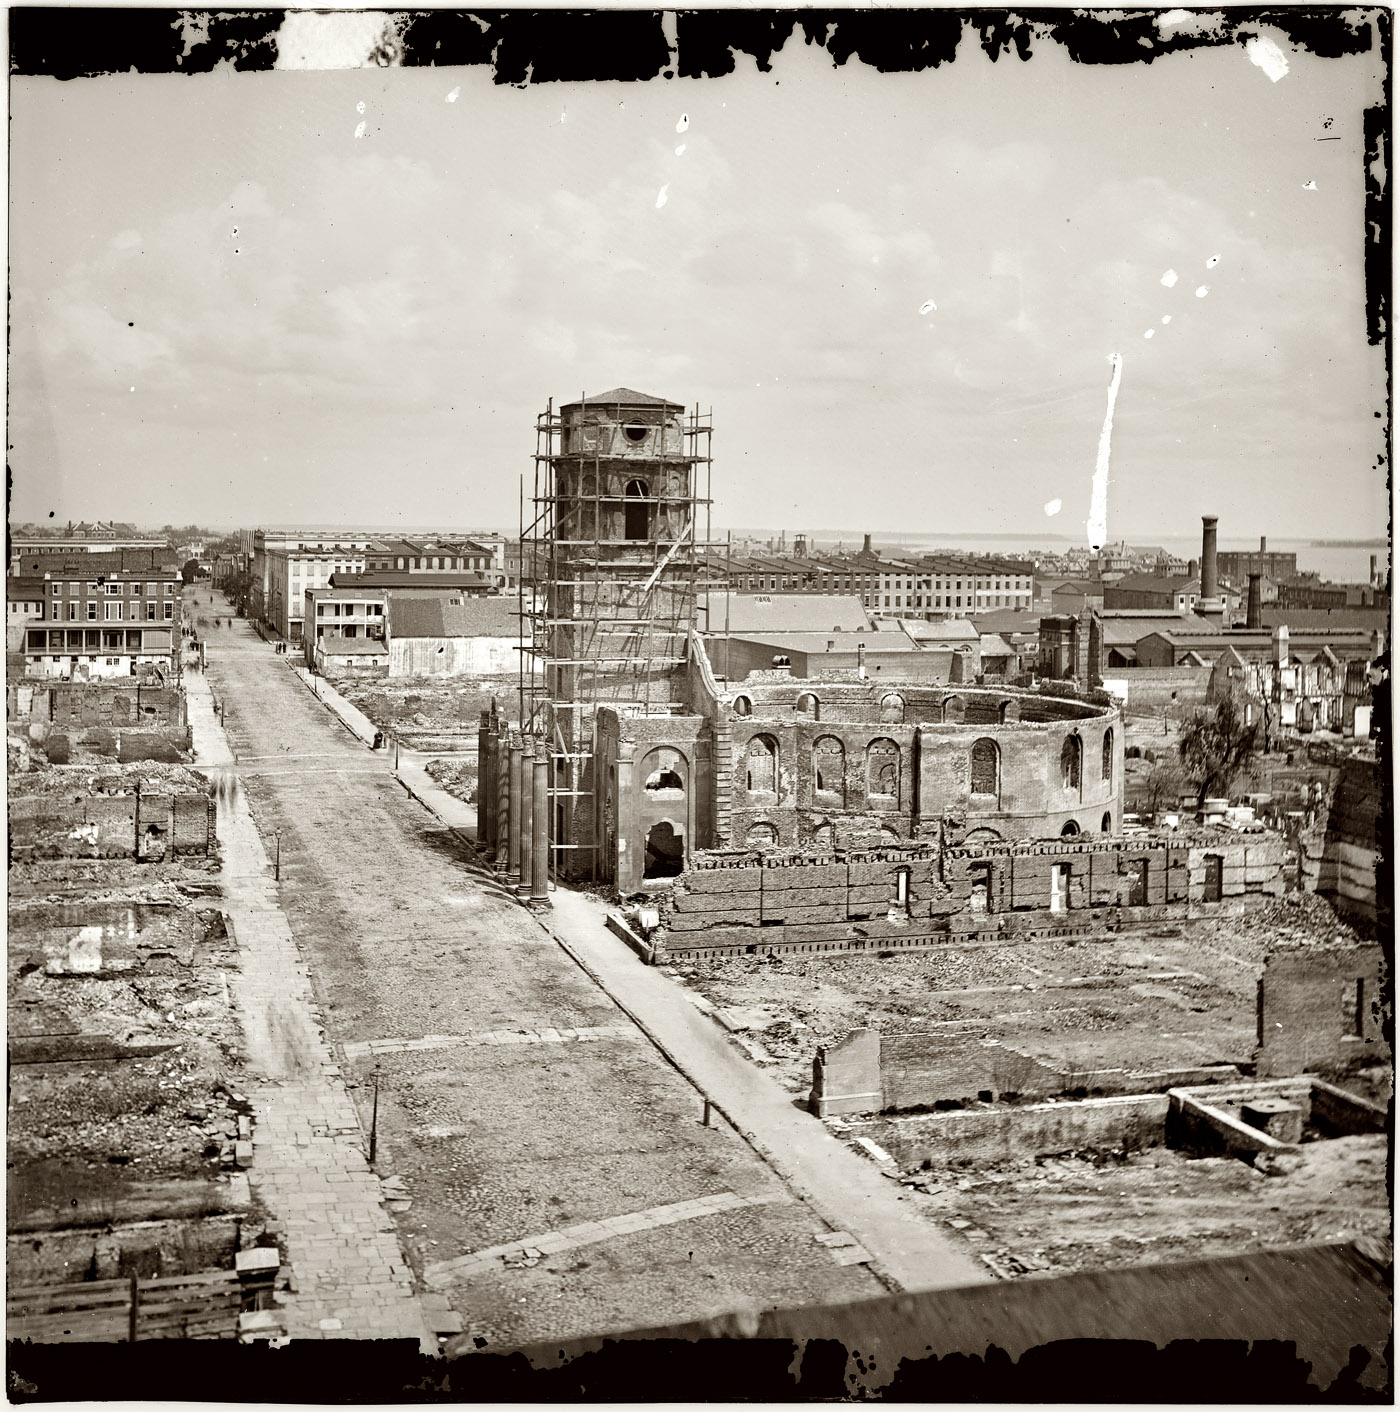 April 1865. Charleston, South Carolina, after bombardment by the Federal Navy. View from roof of the Mills House, looking up Meeting Street at ruins of the Circular Church, damaged in an 1861 fire. View full size. This is the scaffolded building seen in last week's Civil War posts. From photographs of the Federal Navy and seaborne expeditions against the Atlantic Coast of the Confederacy, 1863-1865. Right half of a wet-plate glass negative stereograph. Of interest is the faint registration of clouds, which I've brought out with the Shadows & Highlights filters in Photoshop. Most daytime outdoor photography from the 19th century shows blank white skies, a common characteristic of the blue-sensitive emulsions used in the days before panchromatic black-and-white emulsions came into use.